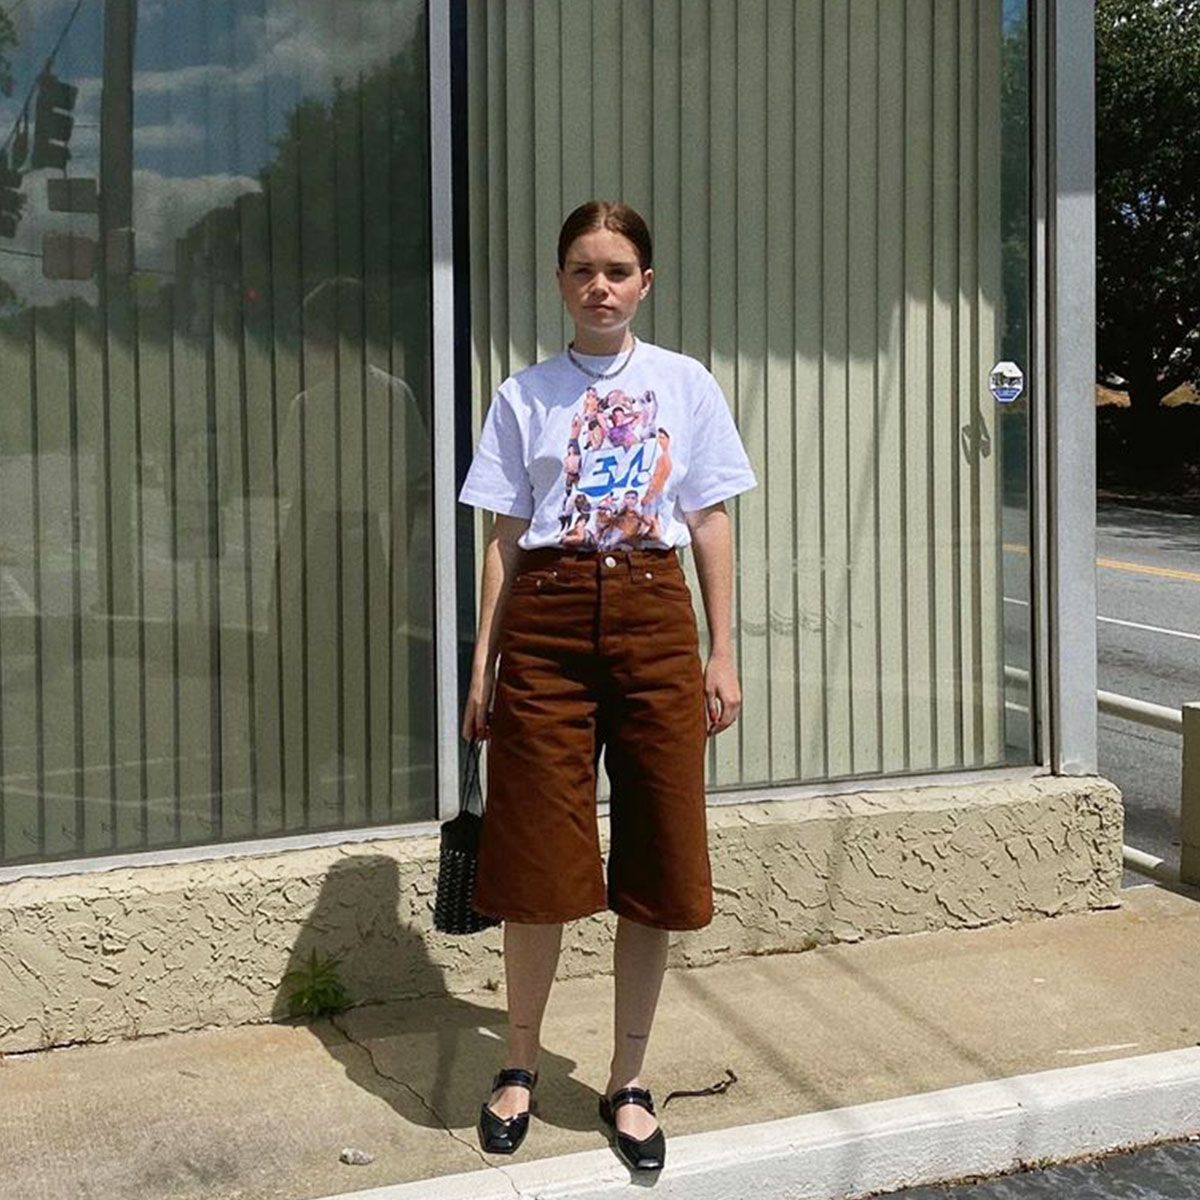 Culottes & Gauchos Are Back! Here's How to Wear Them